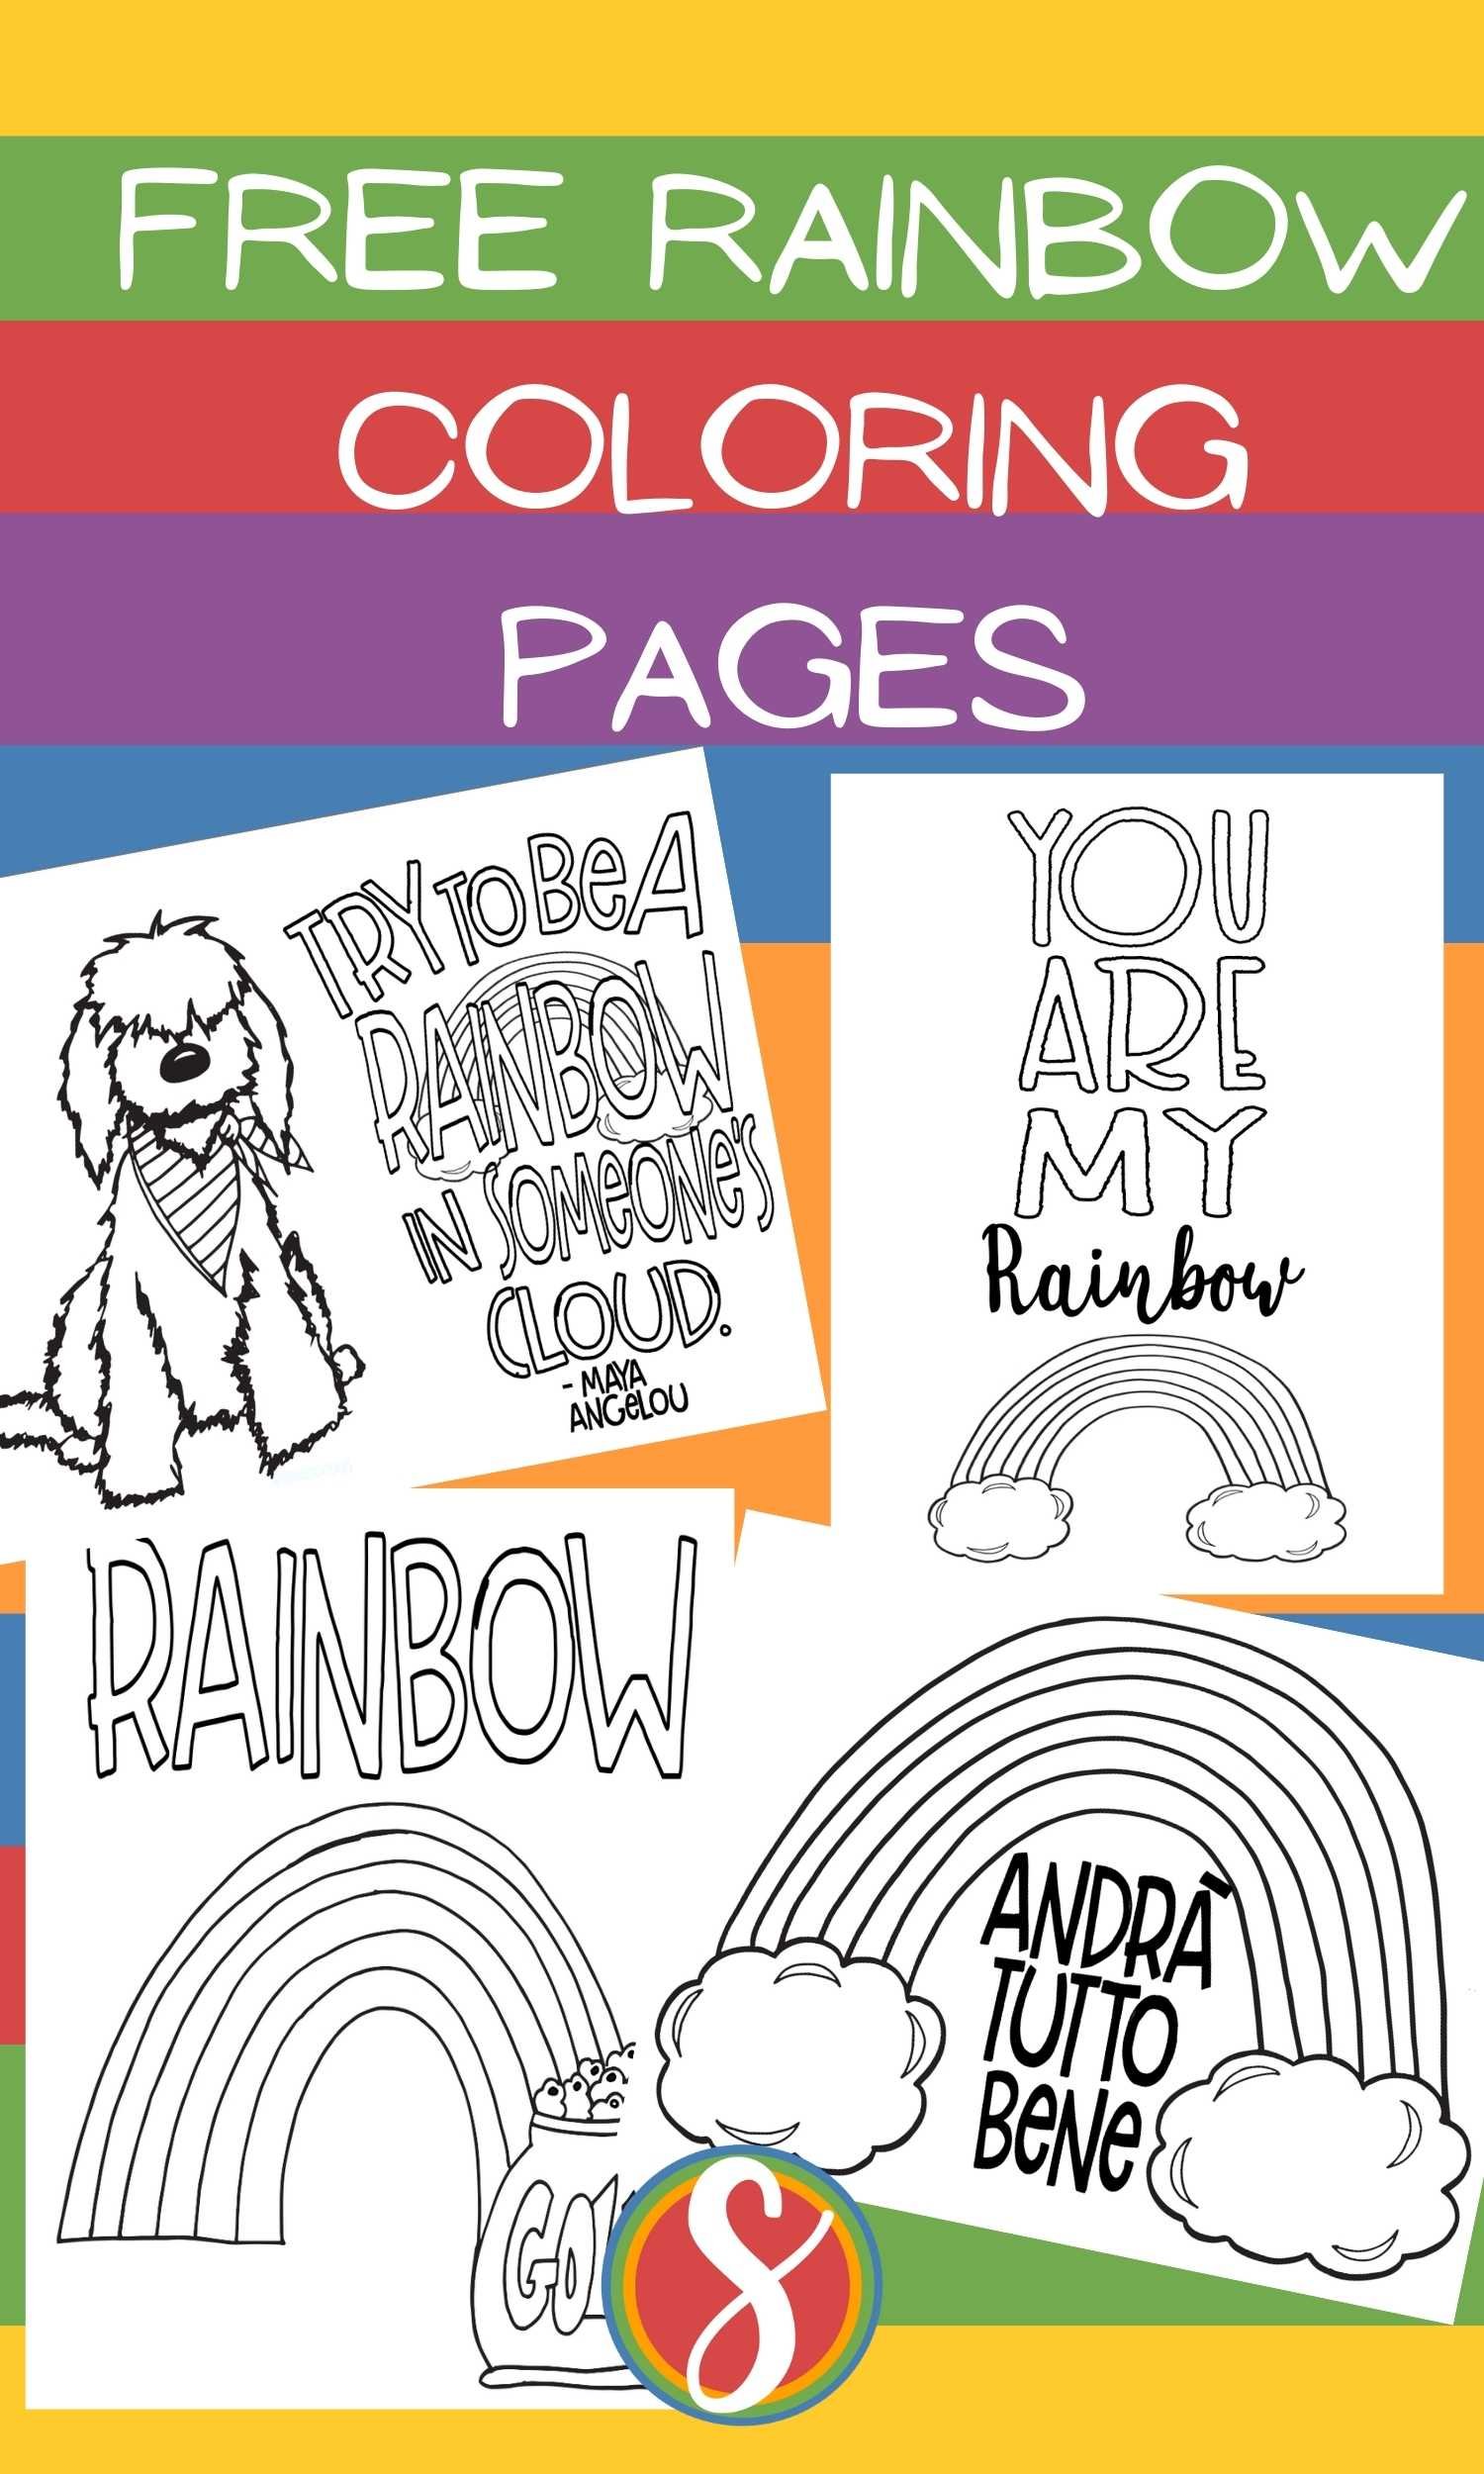 Free Rainbow Friends Party Printables! + Coloring Pages